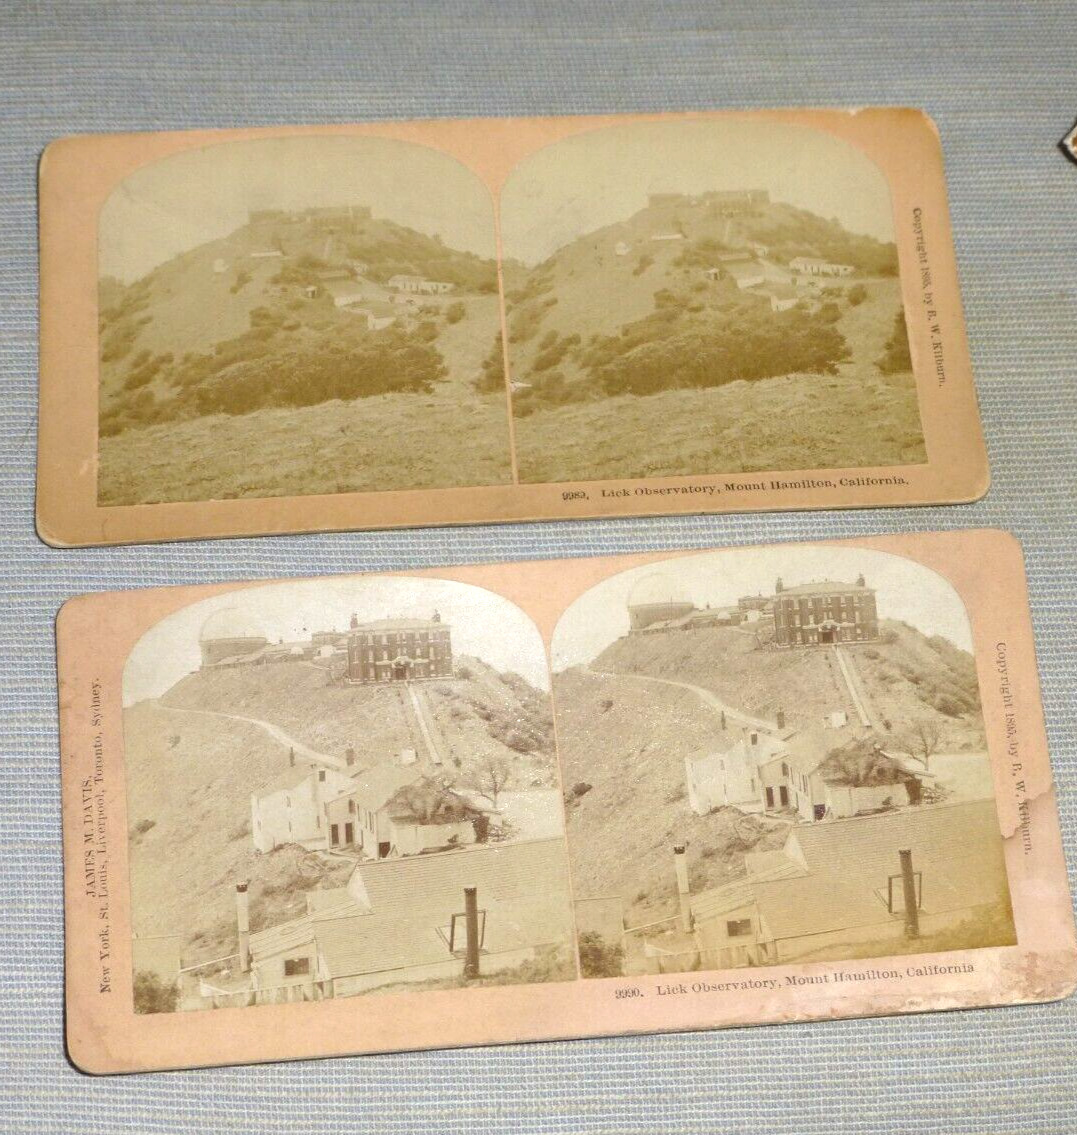 VINTAGE lot of 2 STEREOVIEW PHOTOS OF LICK OBSERVATORY MT. HAMILTON CAL 1895